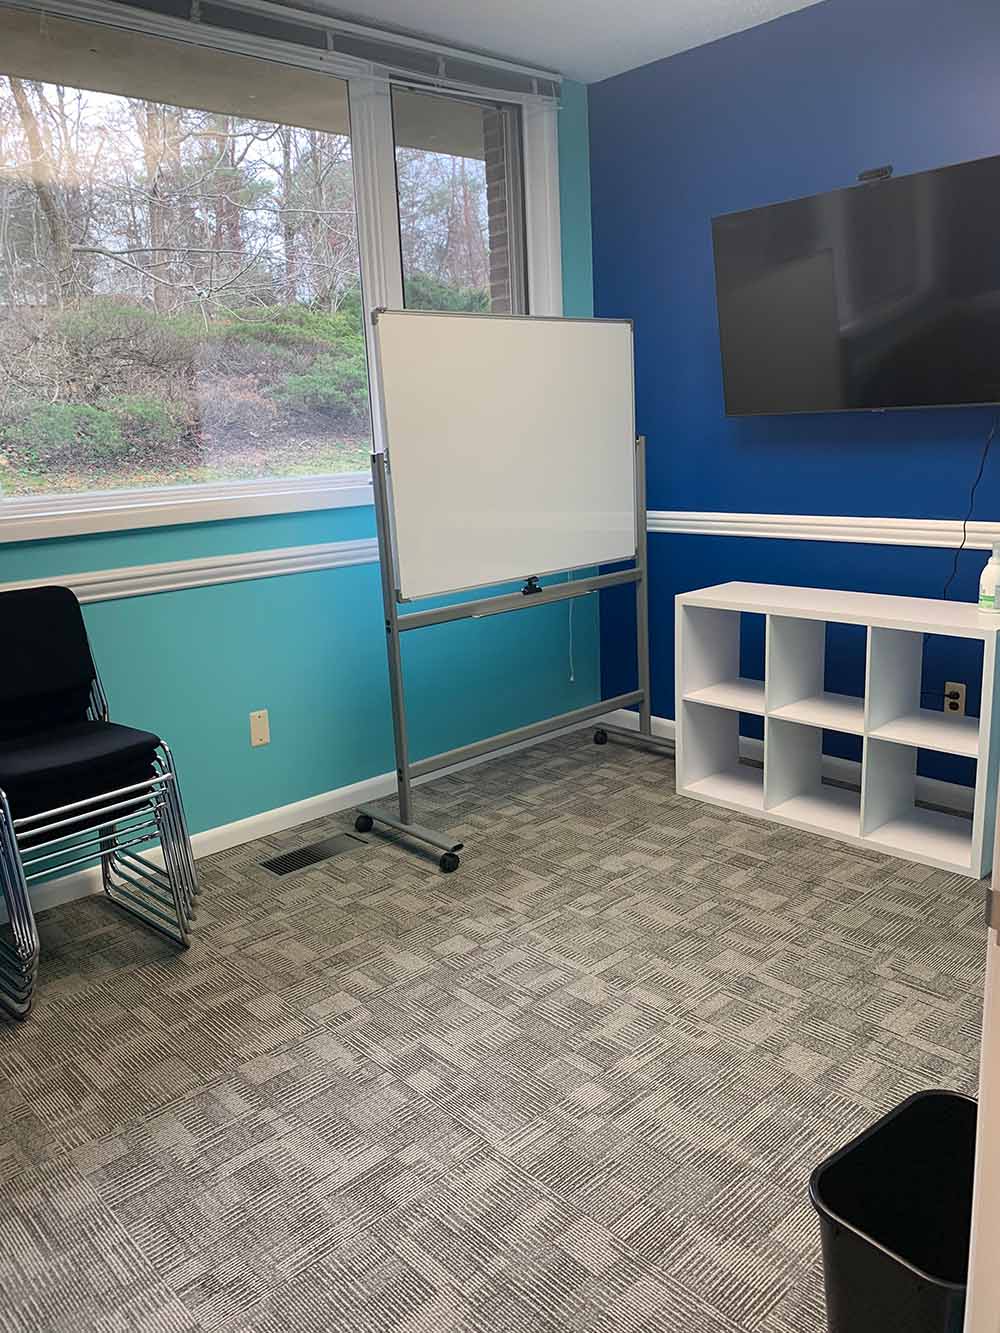 Support group meeting room at Eleanor Health's addiction treatment center in Sparta, New Jersey